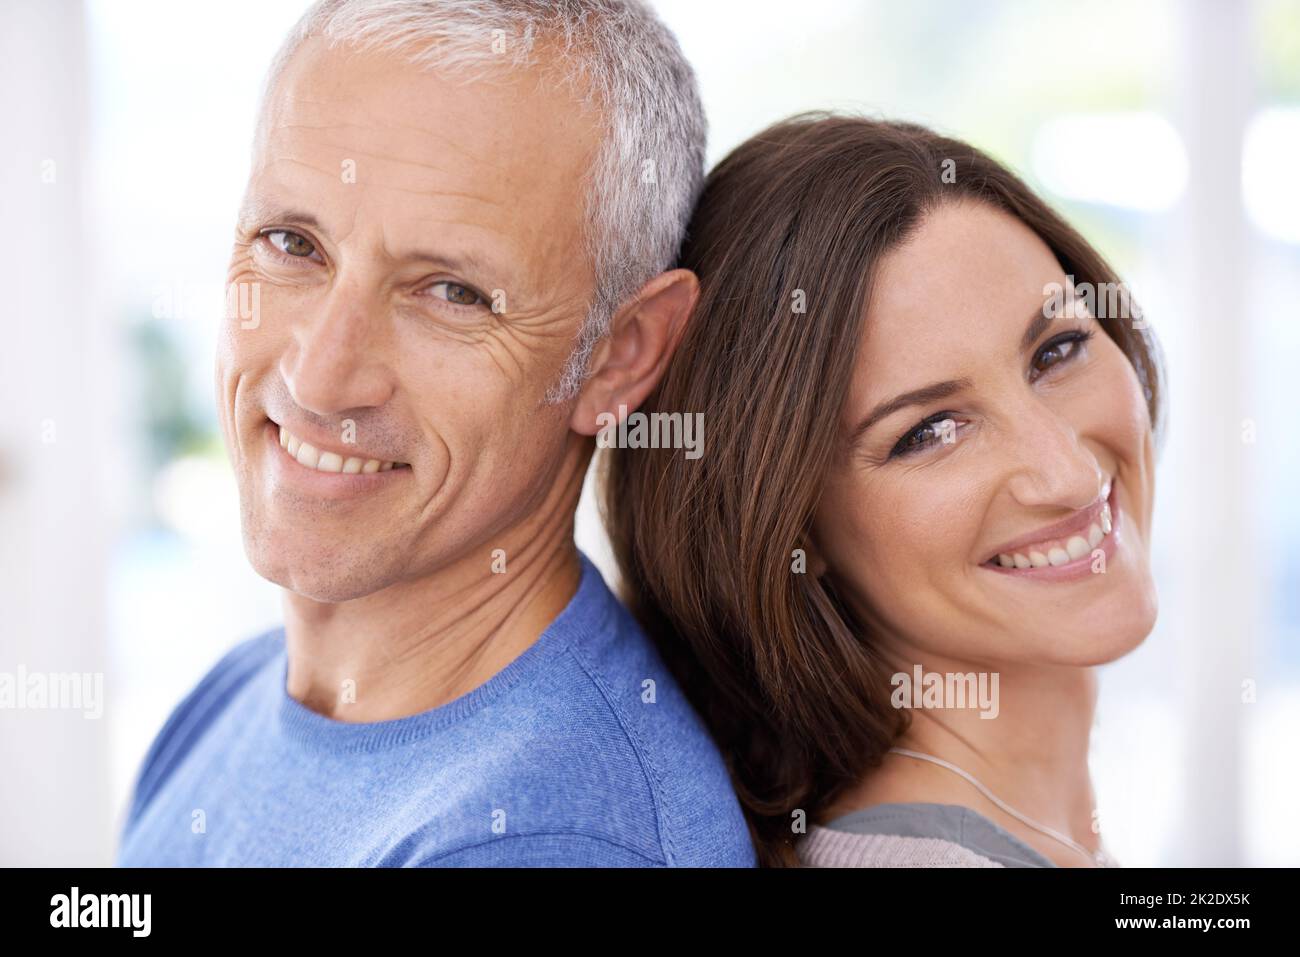 Love knows no age. Shot of an affectionate young woman and her mature husband. Stock Photo